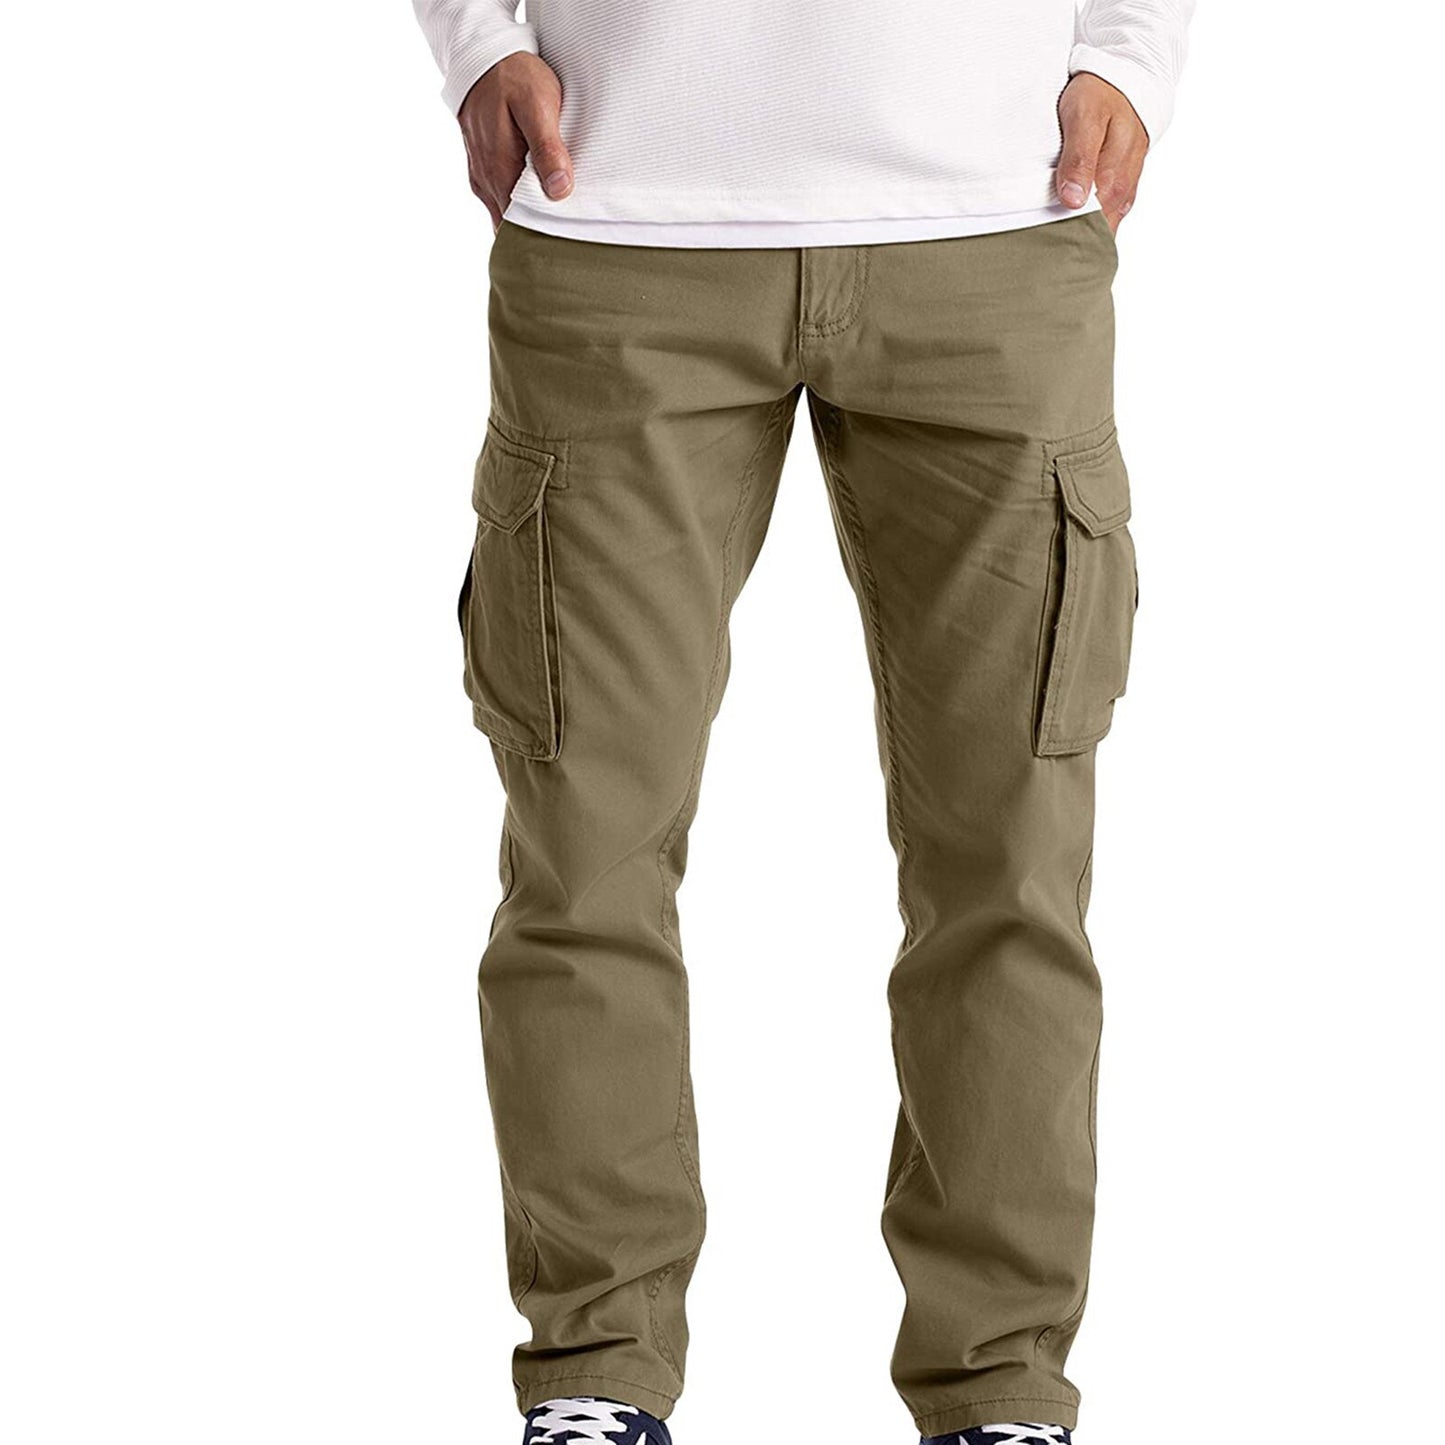 Male Casual Cargo Style Jeans